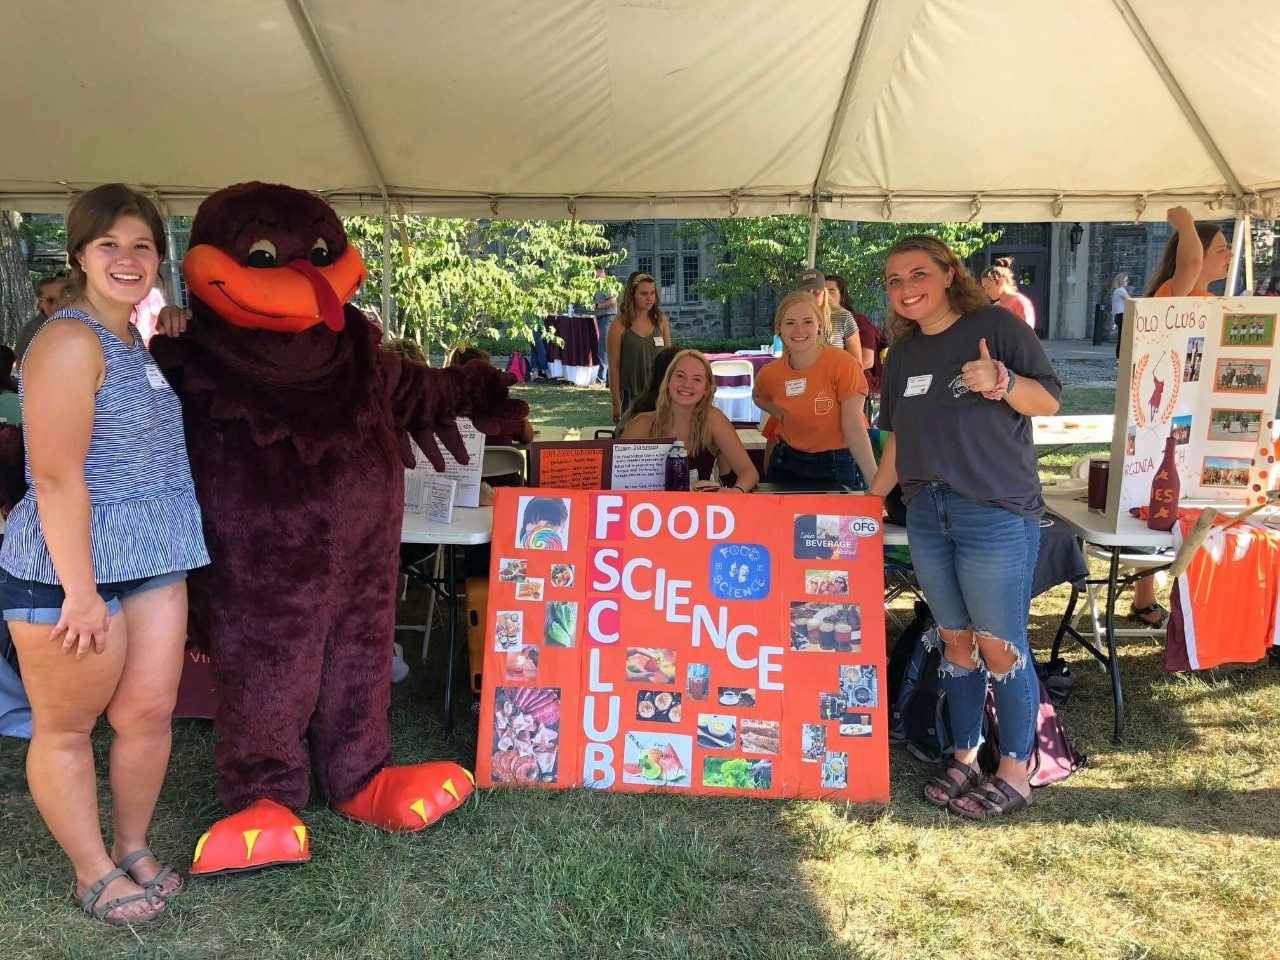 Food Science Club members pose with the Hokiebird in front of their table display.